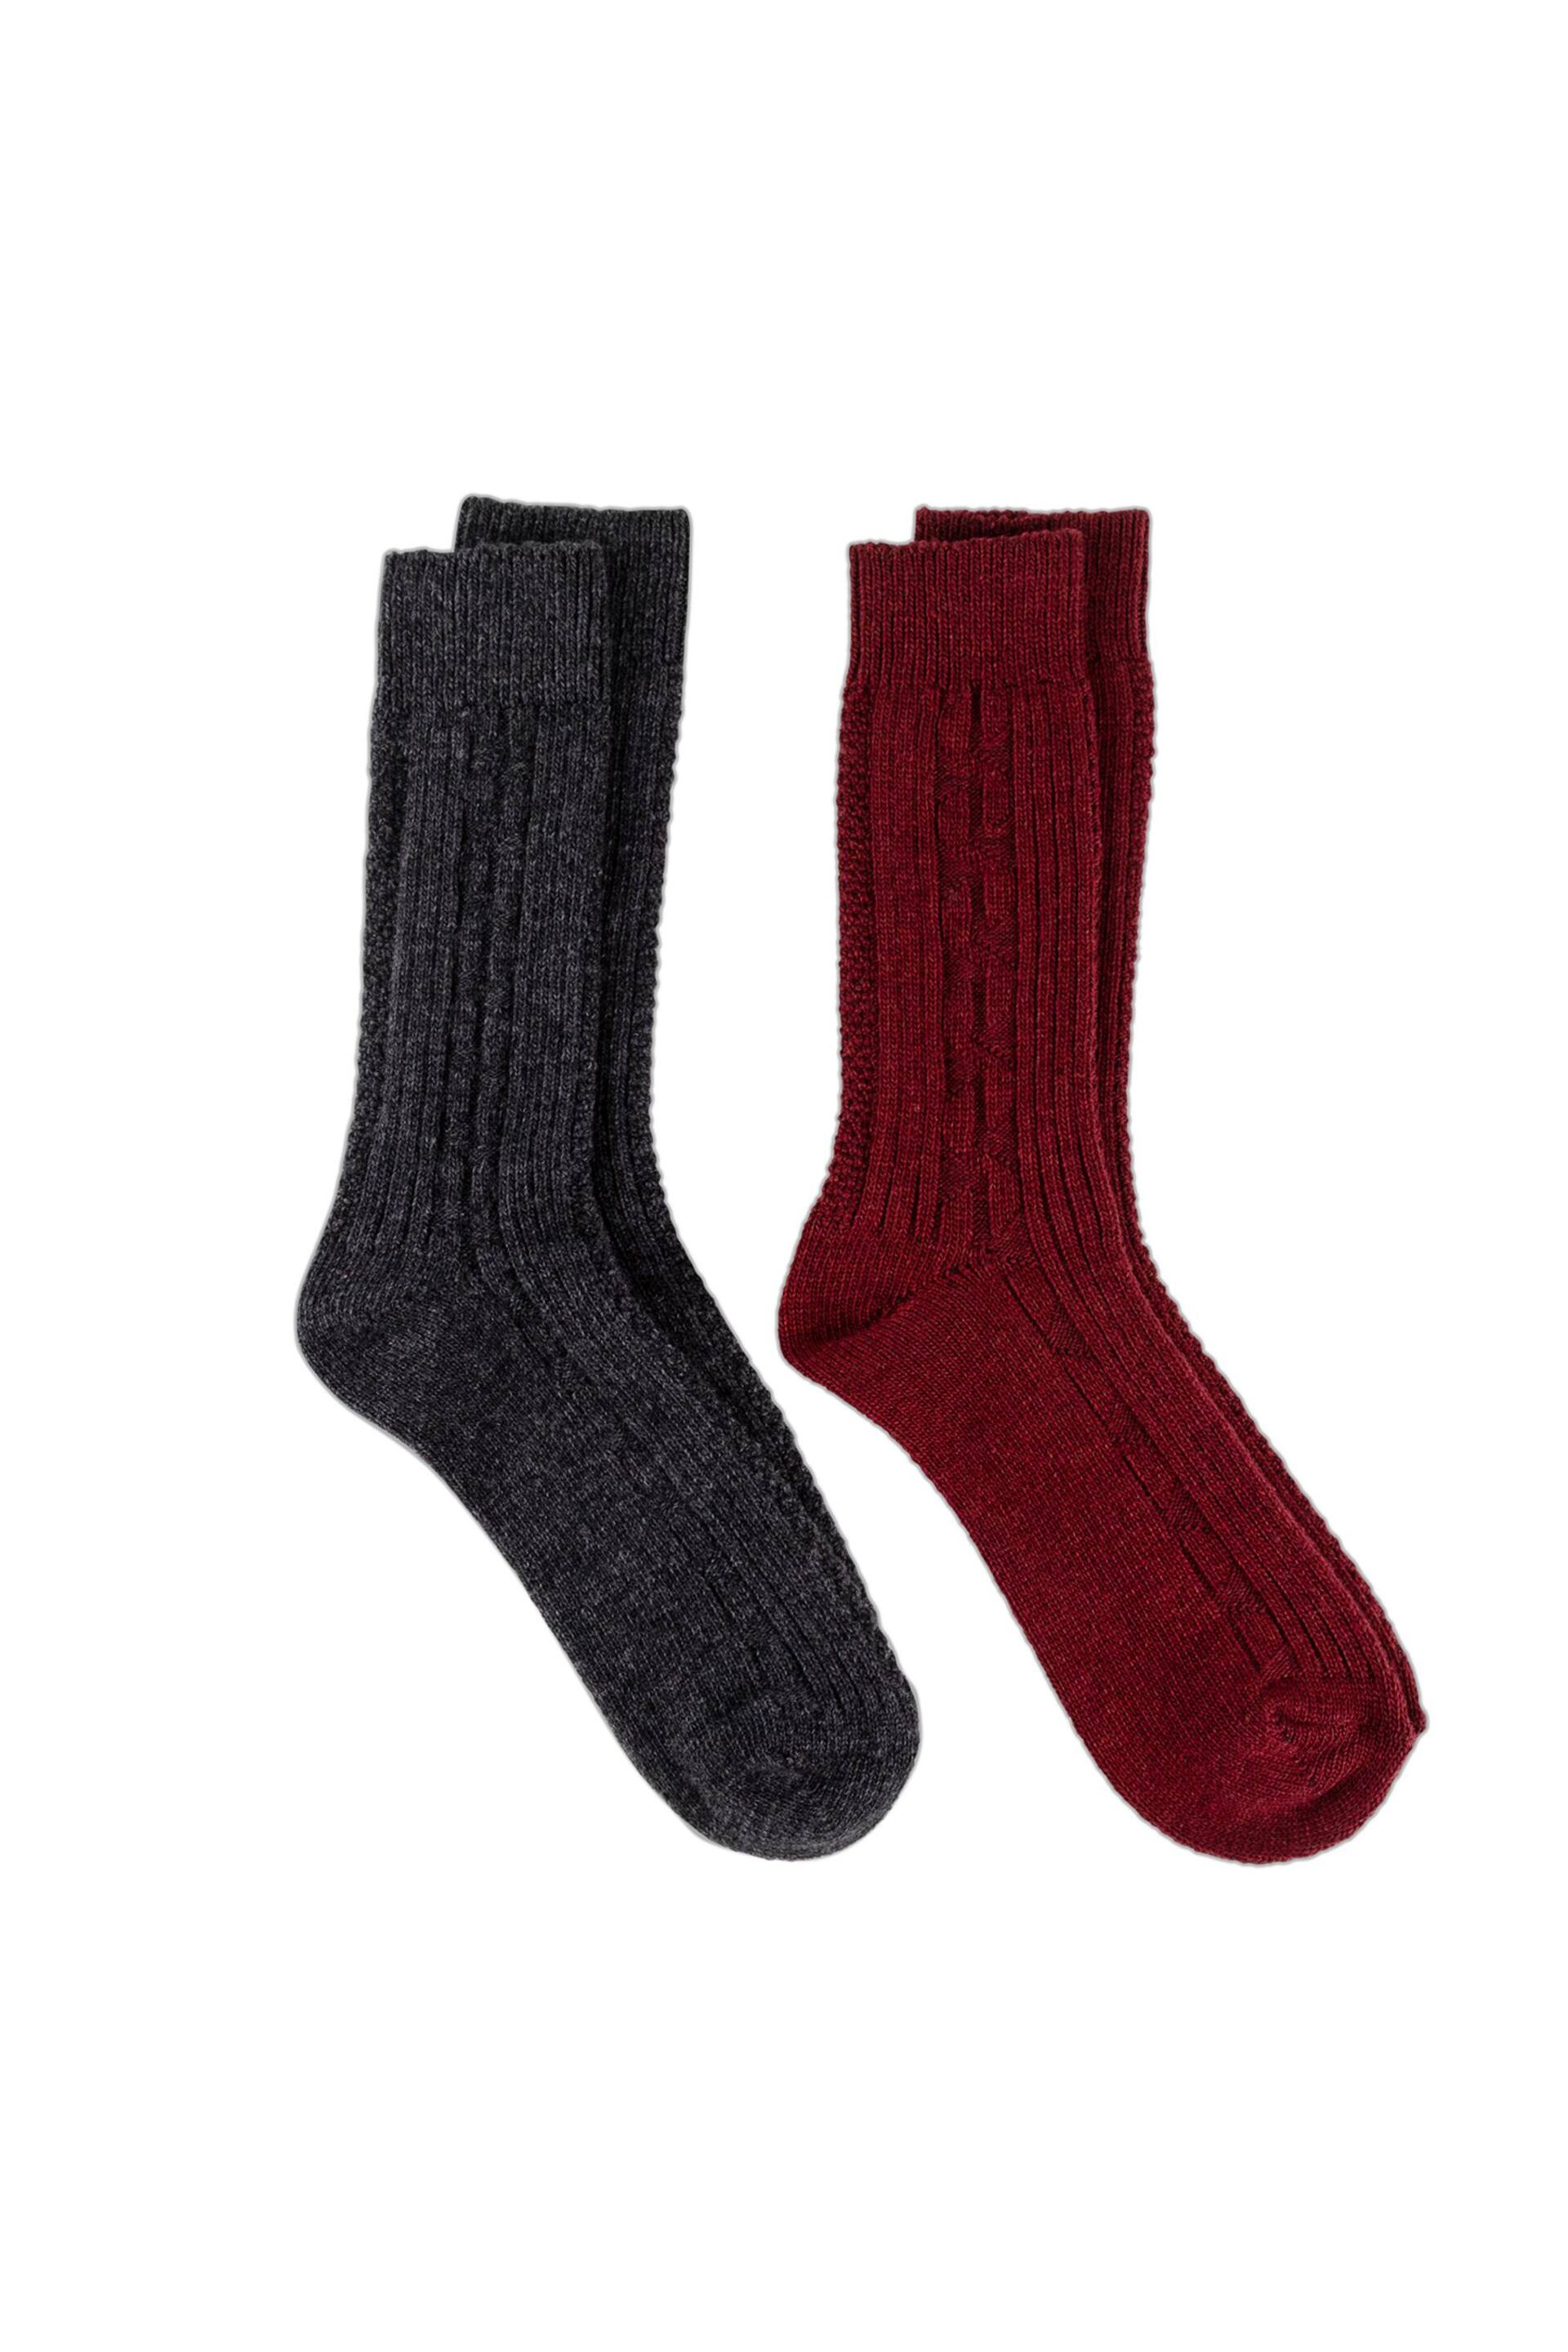 Totes Grey Twin Pack Thermal Wool Blend Socks - Image 1 of 5